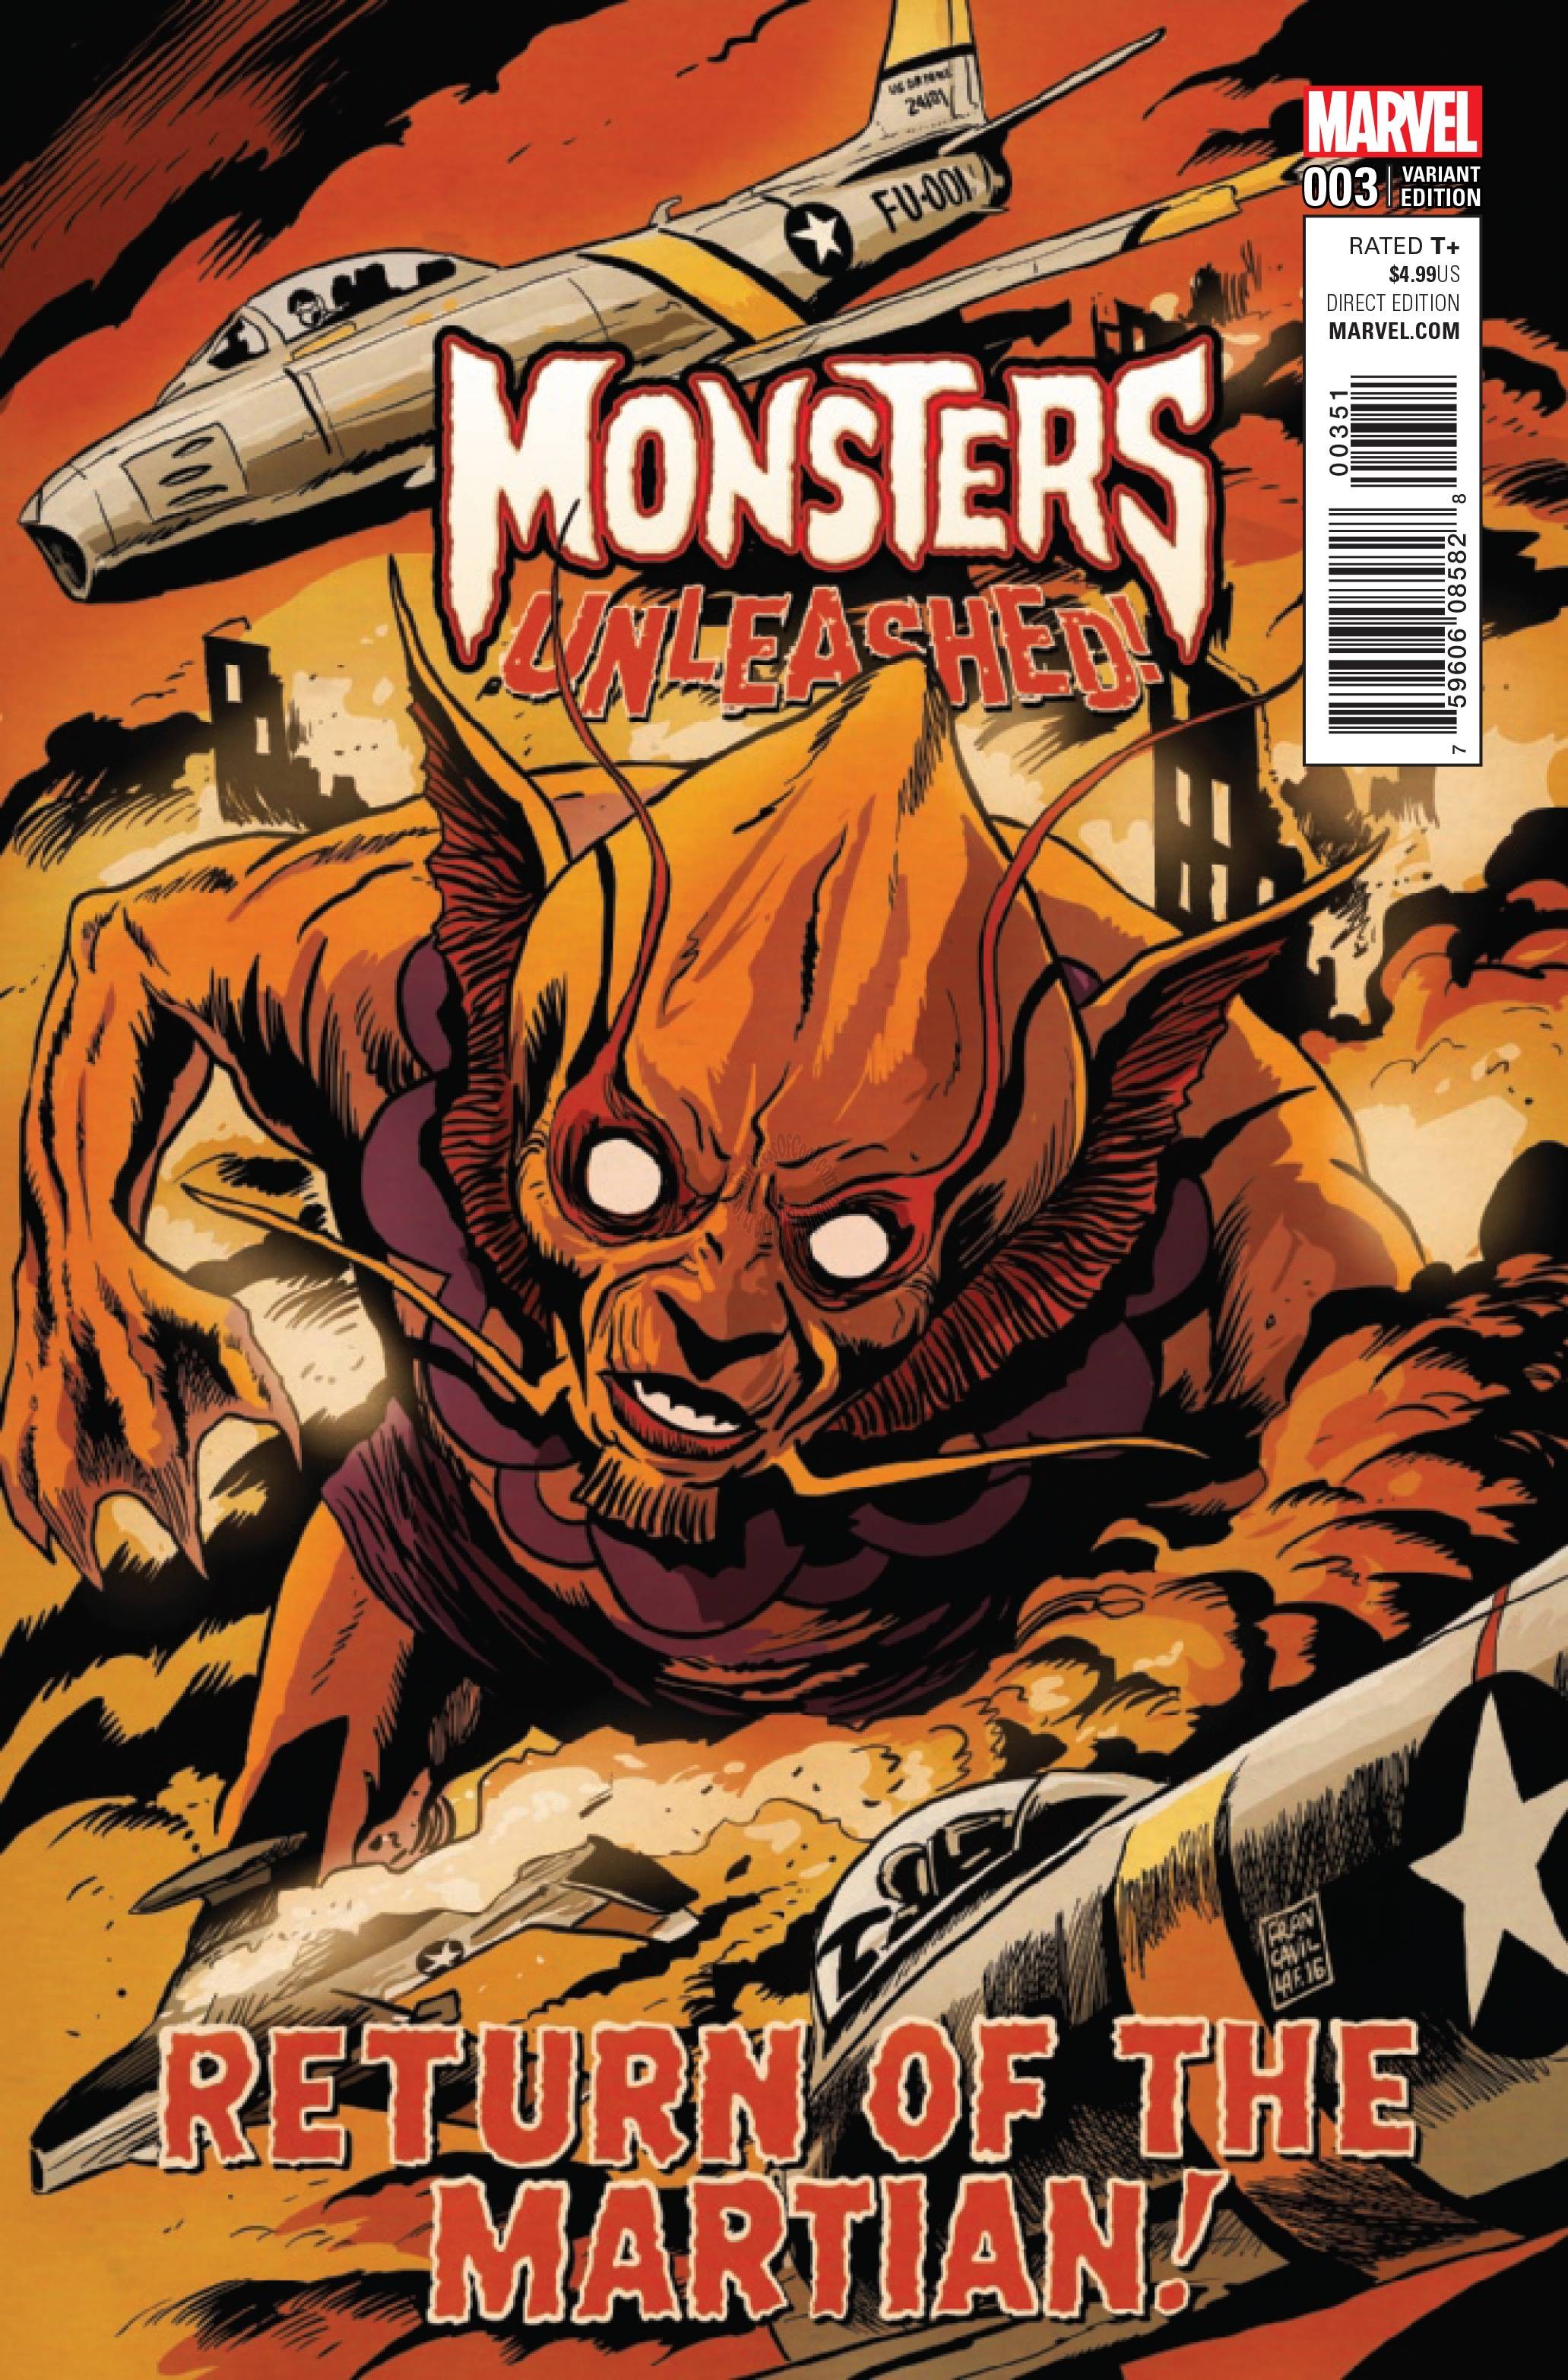 MONSTERS UNLEASHED #3 (OF 5) FRANCAVILLA 50S MOVIE POSTER VARIANT